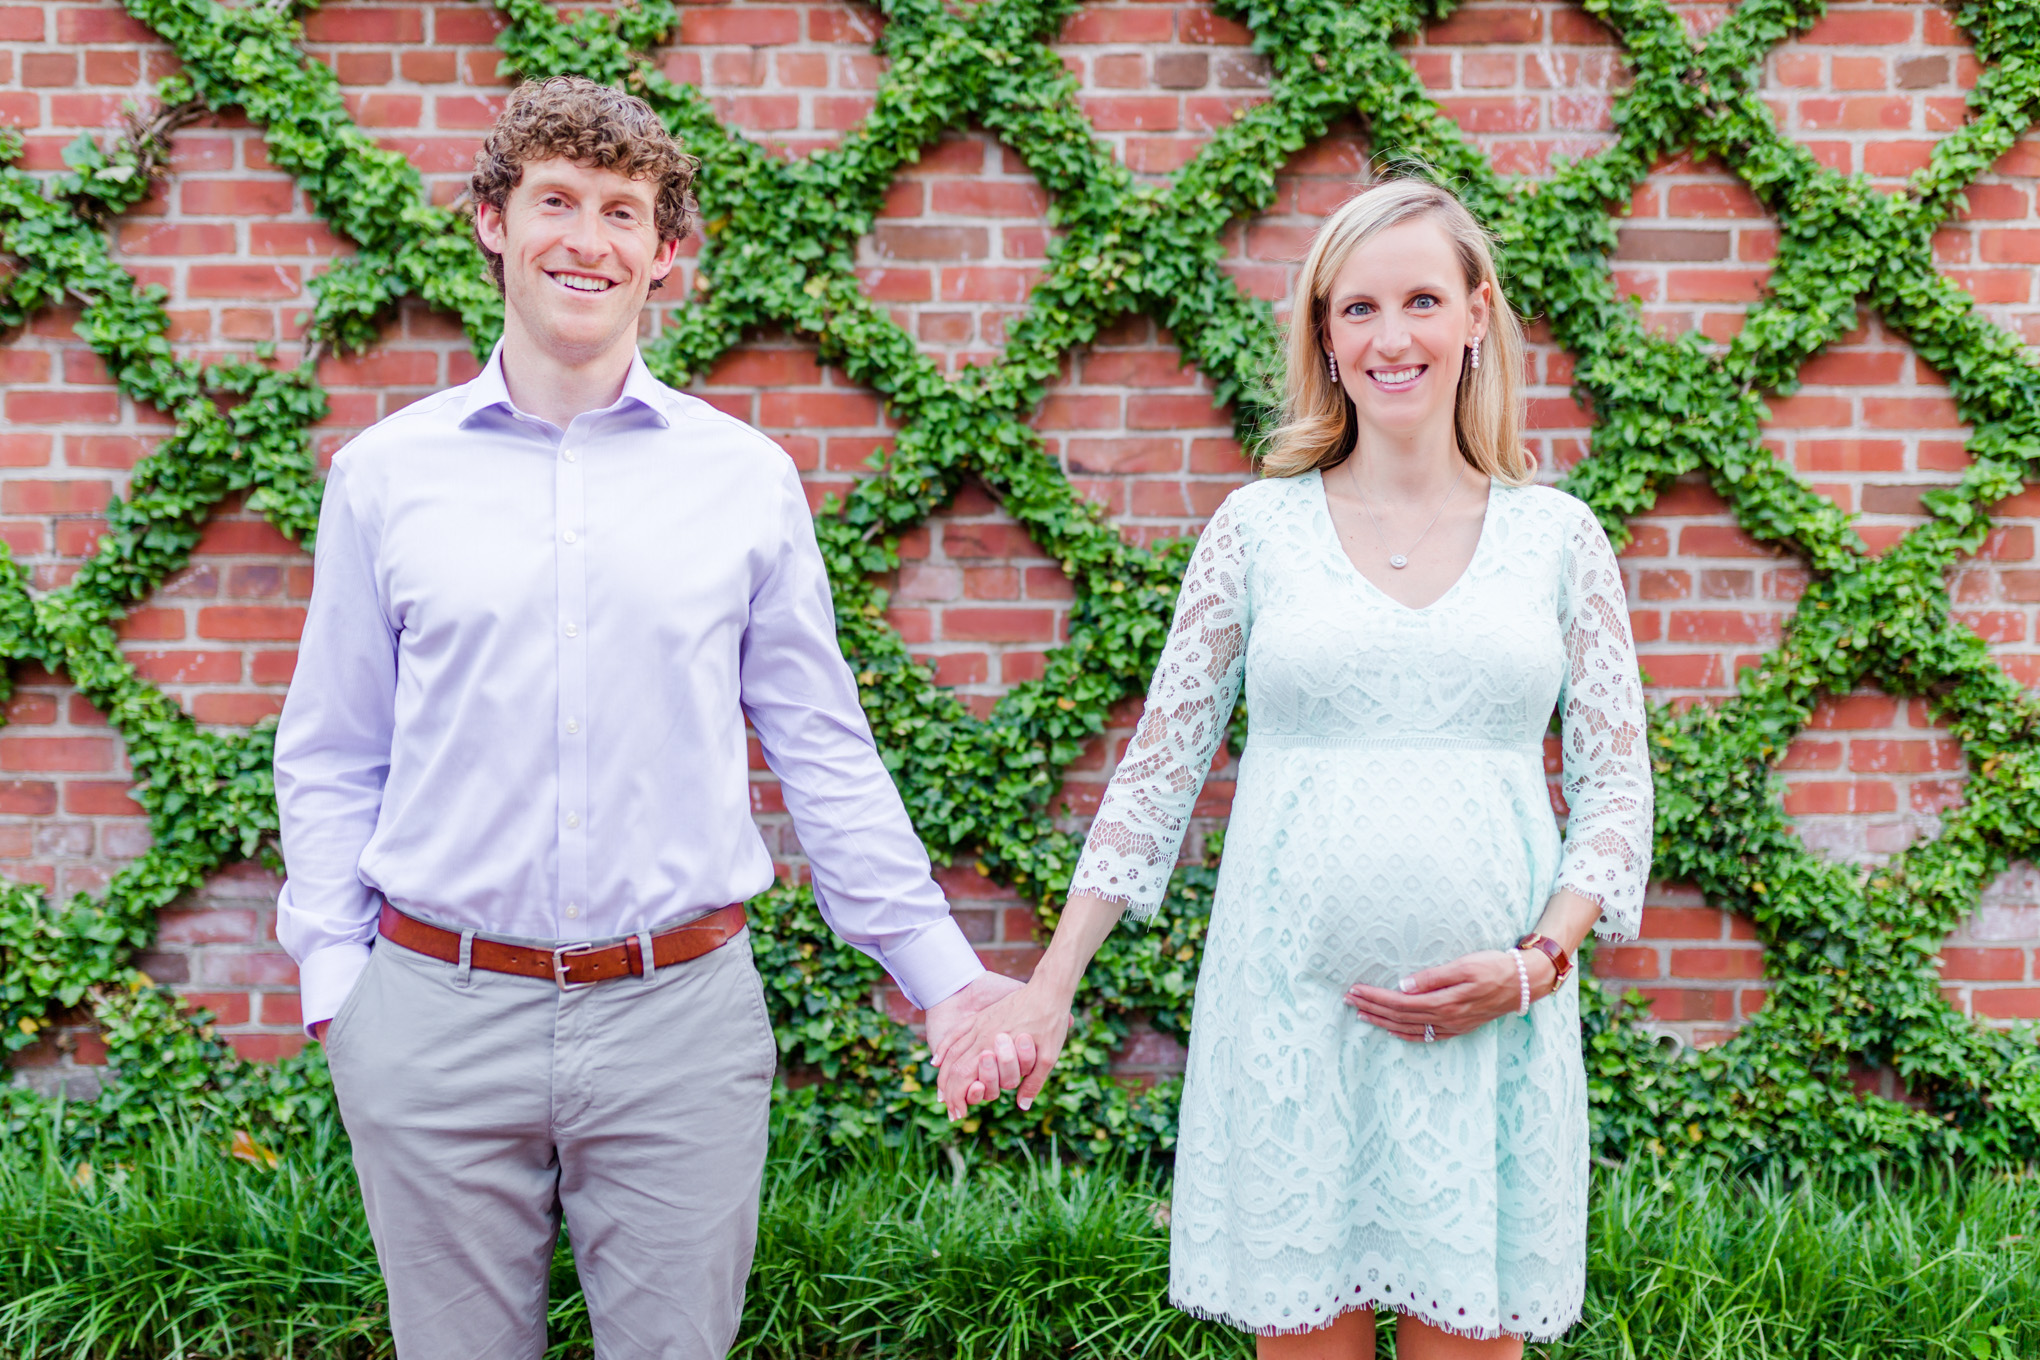 Georgetown maternity photos, married couple, pregnant woman, criss cross, plant life, garden wall, baby bump